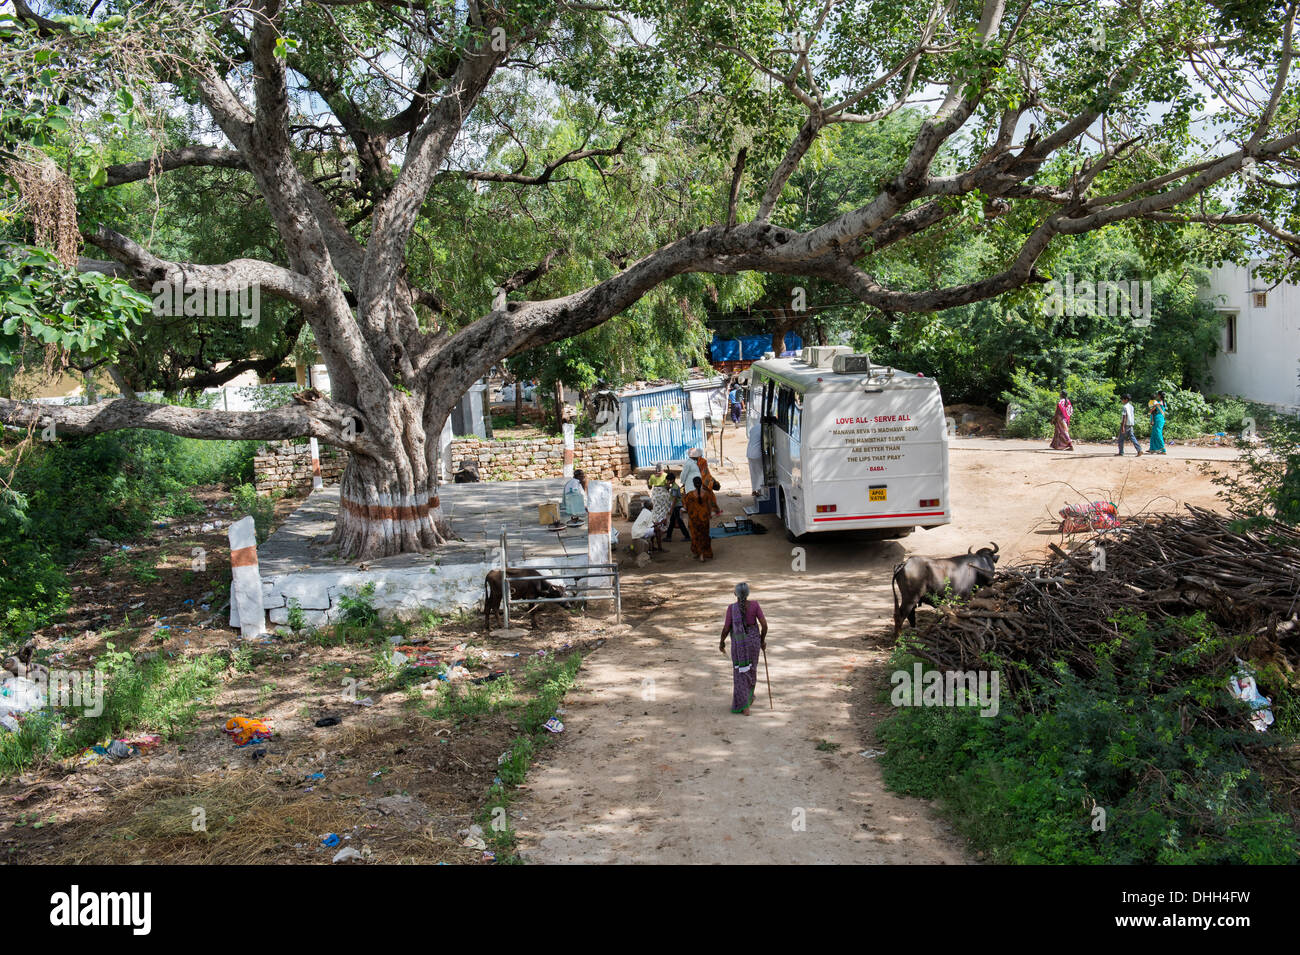 Sathya Sai Baba mobile outreach hospital bus parked at a rural Indian village recieving patients. Andhra Pradesh, India Stock Photo